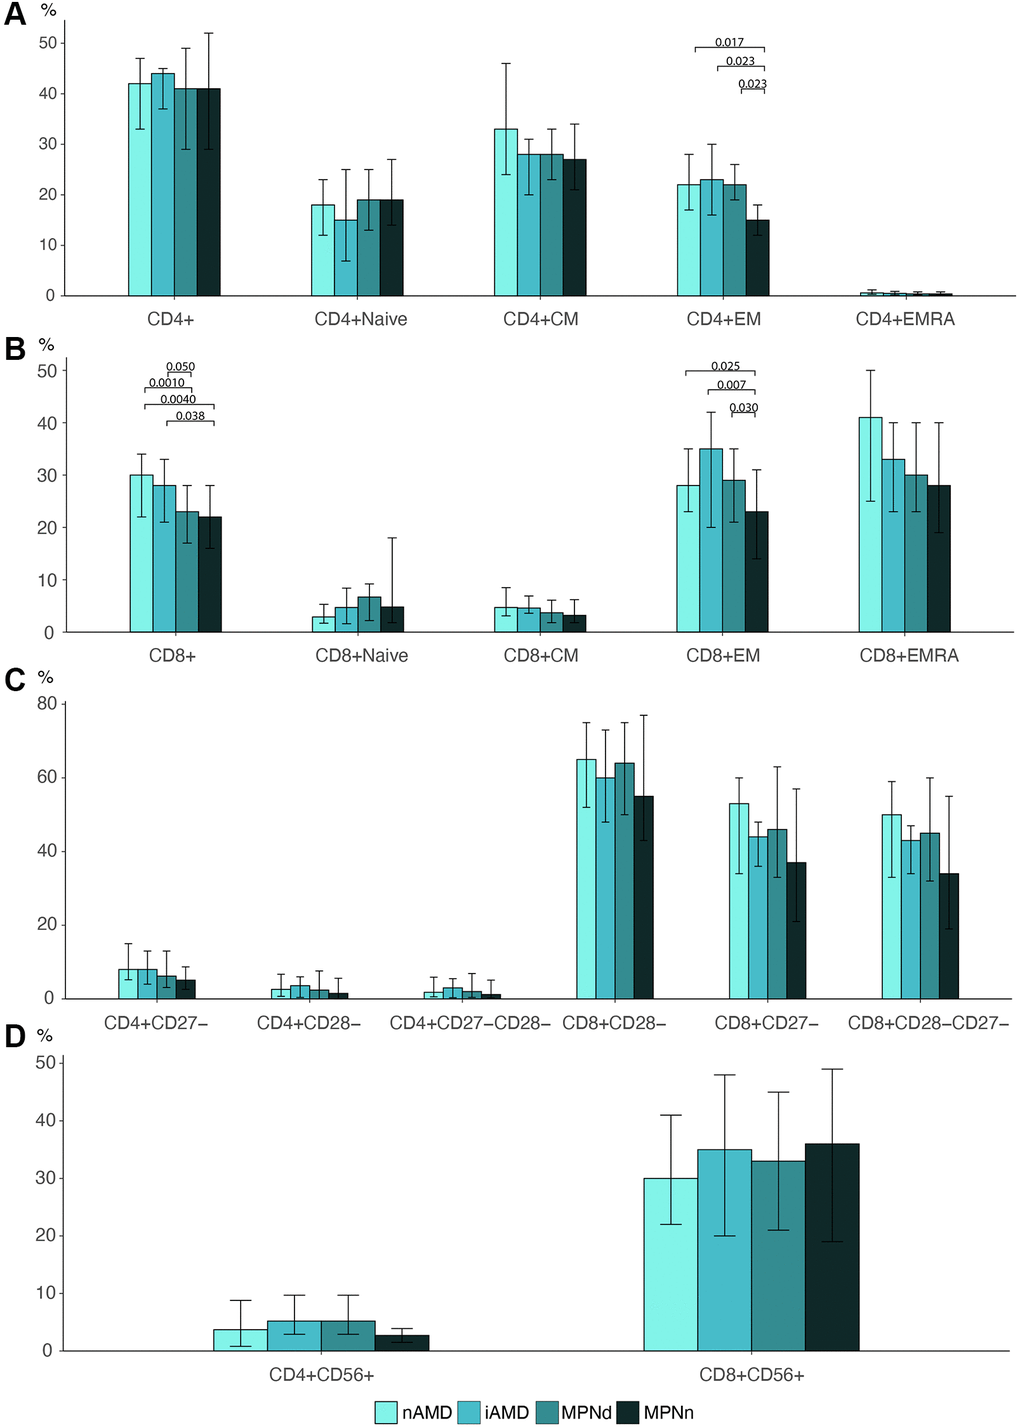 Barplots of (A) CD4 T cell differentiation profile. (B) CD8 T cell differentiation profile. (C) Loss of costimulatory markers in CD4 and CD8 T cells. (D) CD56 expression in CD4 and CD8 cells Statistically significant p-values are shown above bar plots. Statistical comparisons between groups: Kruskal Wallis test or robust linear regression if the outcome were age-dependent and Wilcoxon rank-sum test for multiple comparisons. Abbreviations: nAMD: neovascular AMD; iAMD: intermediate AMD; MPN: myeloproliferative neoplasms; MPNd: Patients with MPN and drusen; MPNn: patients with MPN and normal retinas; Naïve: naïve T cells; CM: central memory T cells; EM: effector memory T cells; EMRA: effector memory CD45Ra+ T cells.